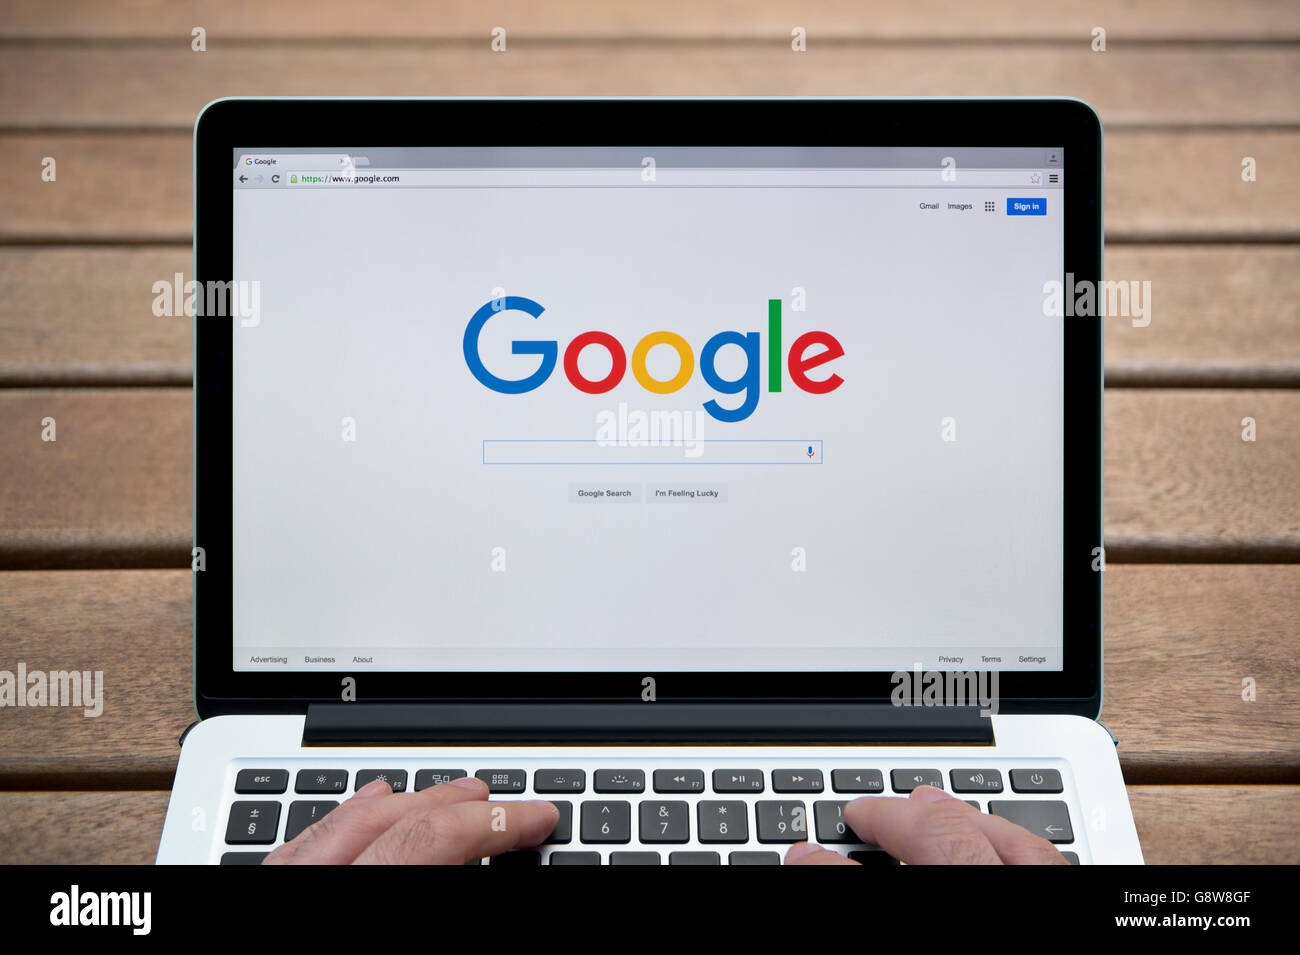 The Google website on a MacBook against a wooden bench outdoor background including a man's fingers (Editorial use only). Stock Photo